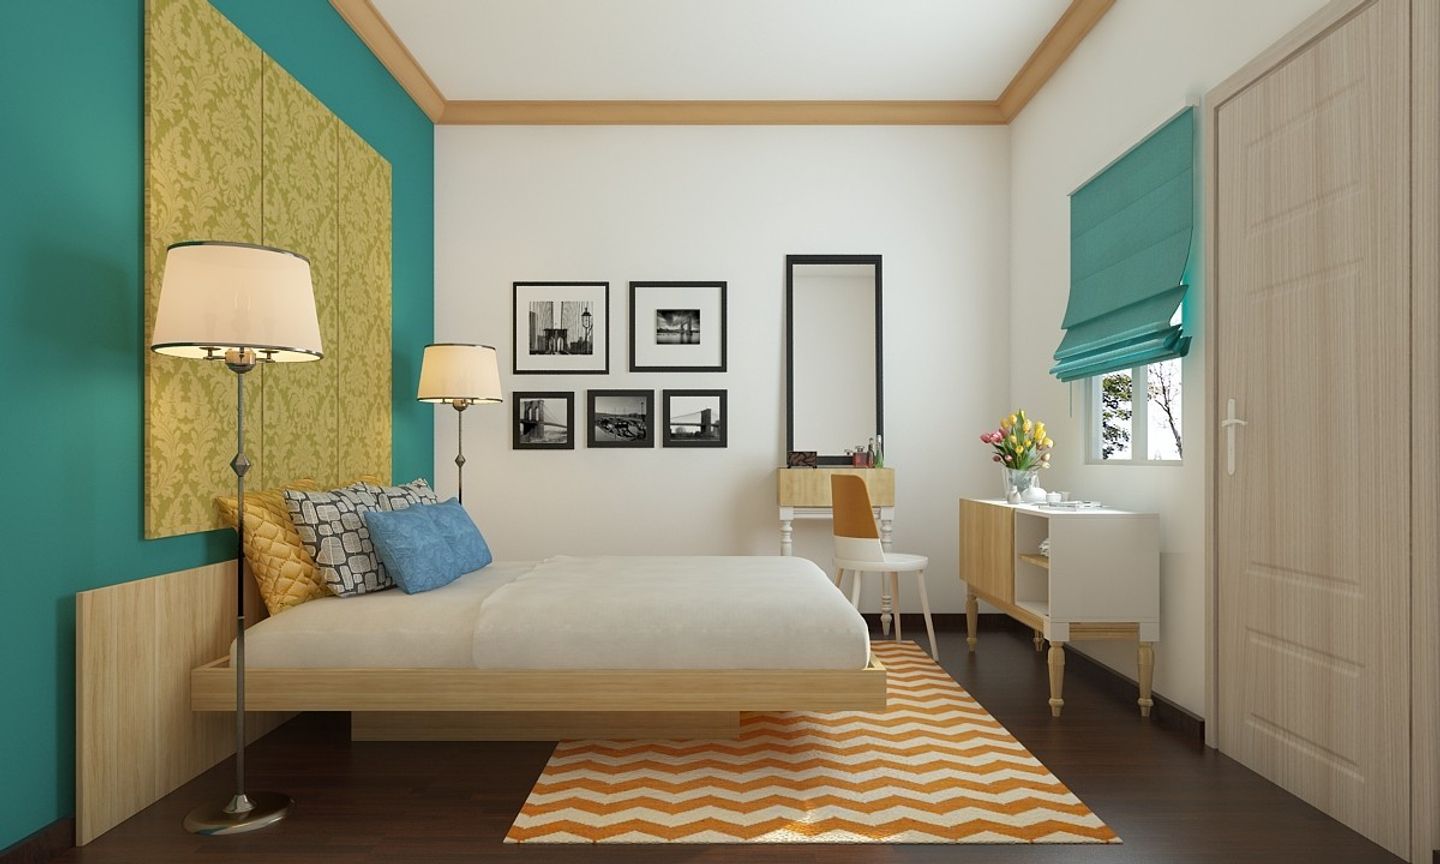 Modern Bedroom Design With Orange And Sea Green Interiors